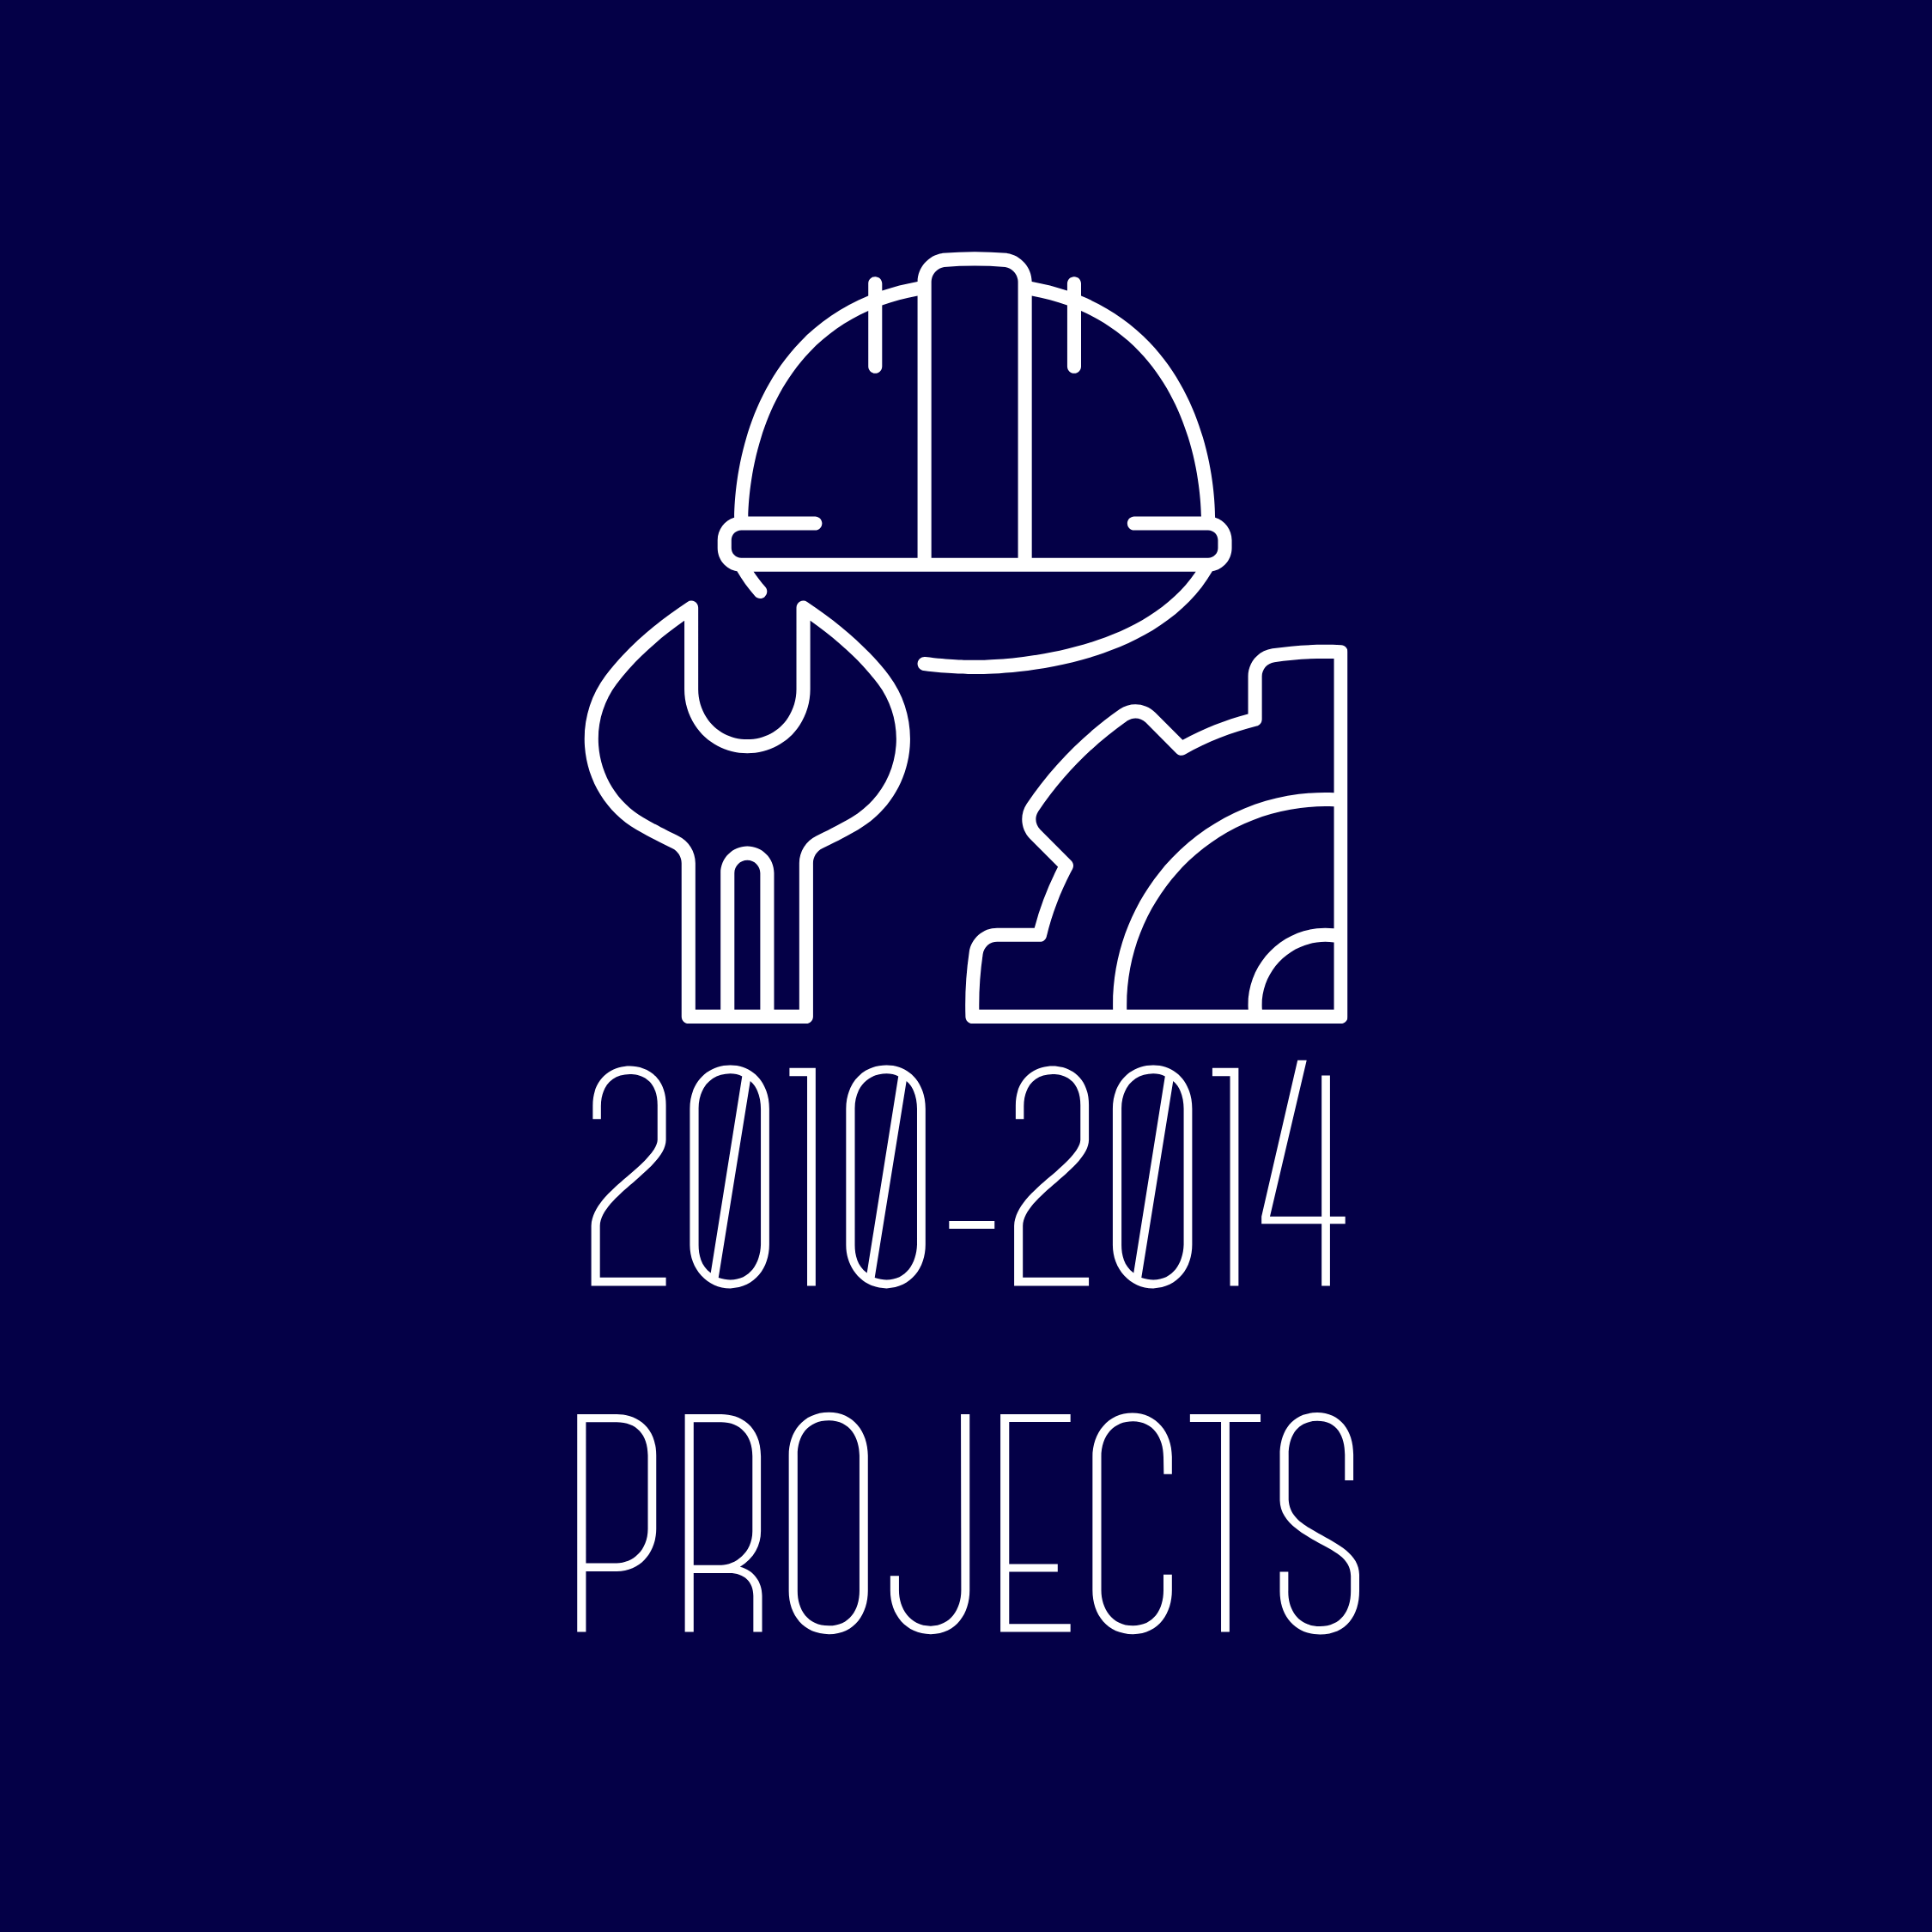 2010-2014 Projects